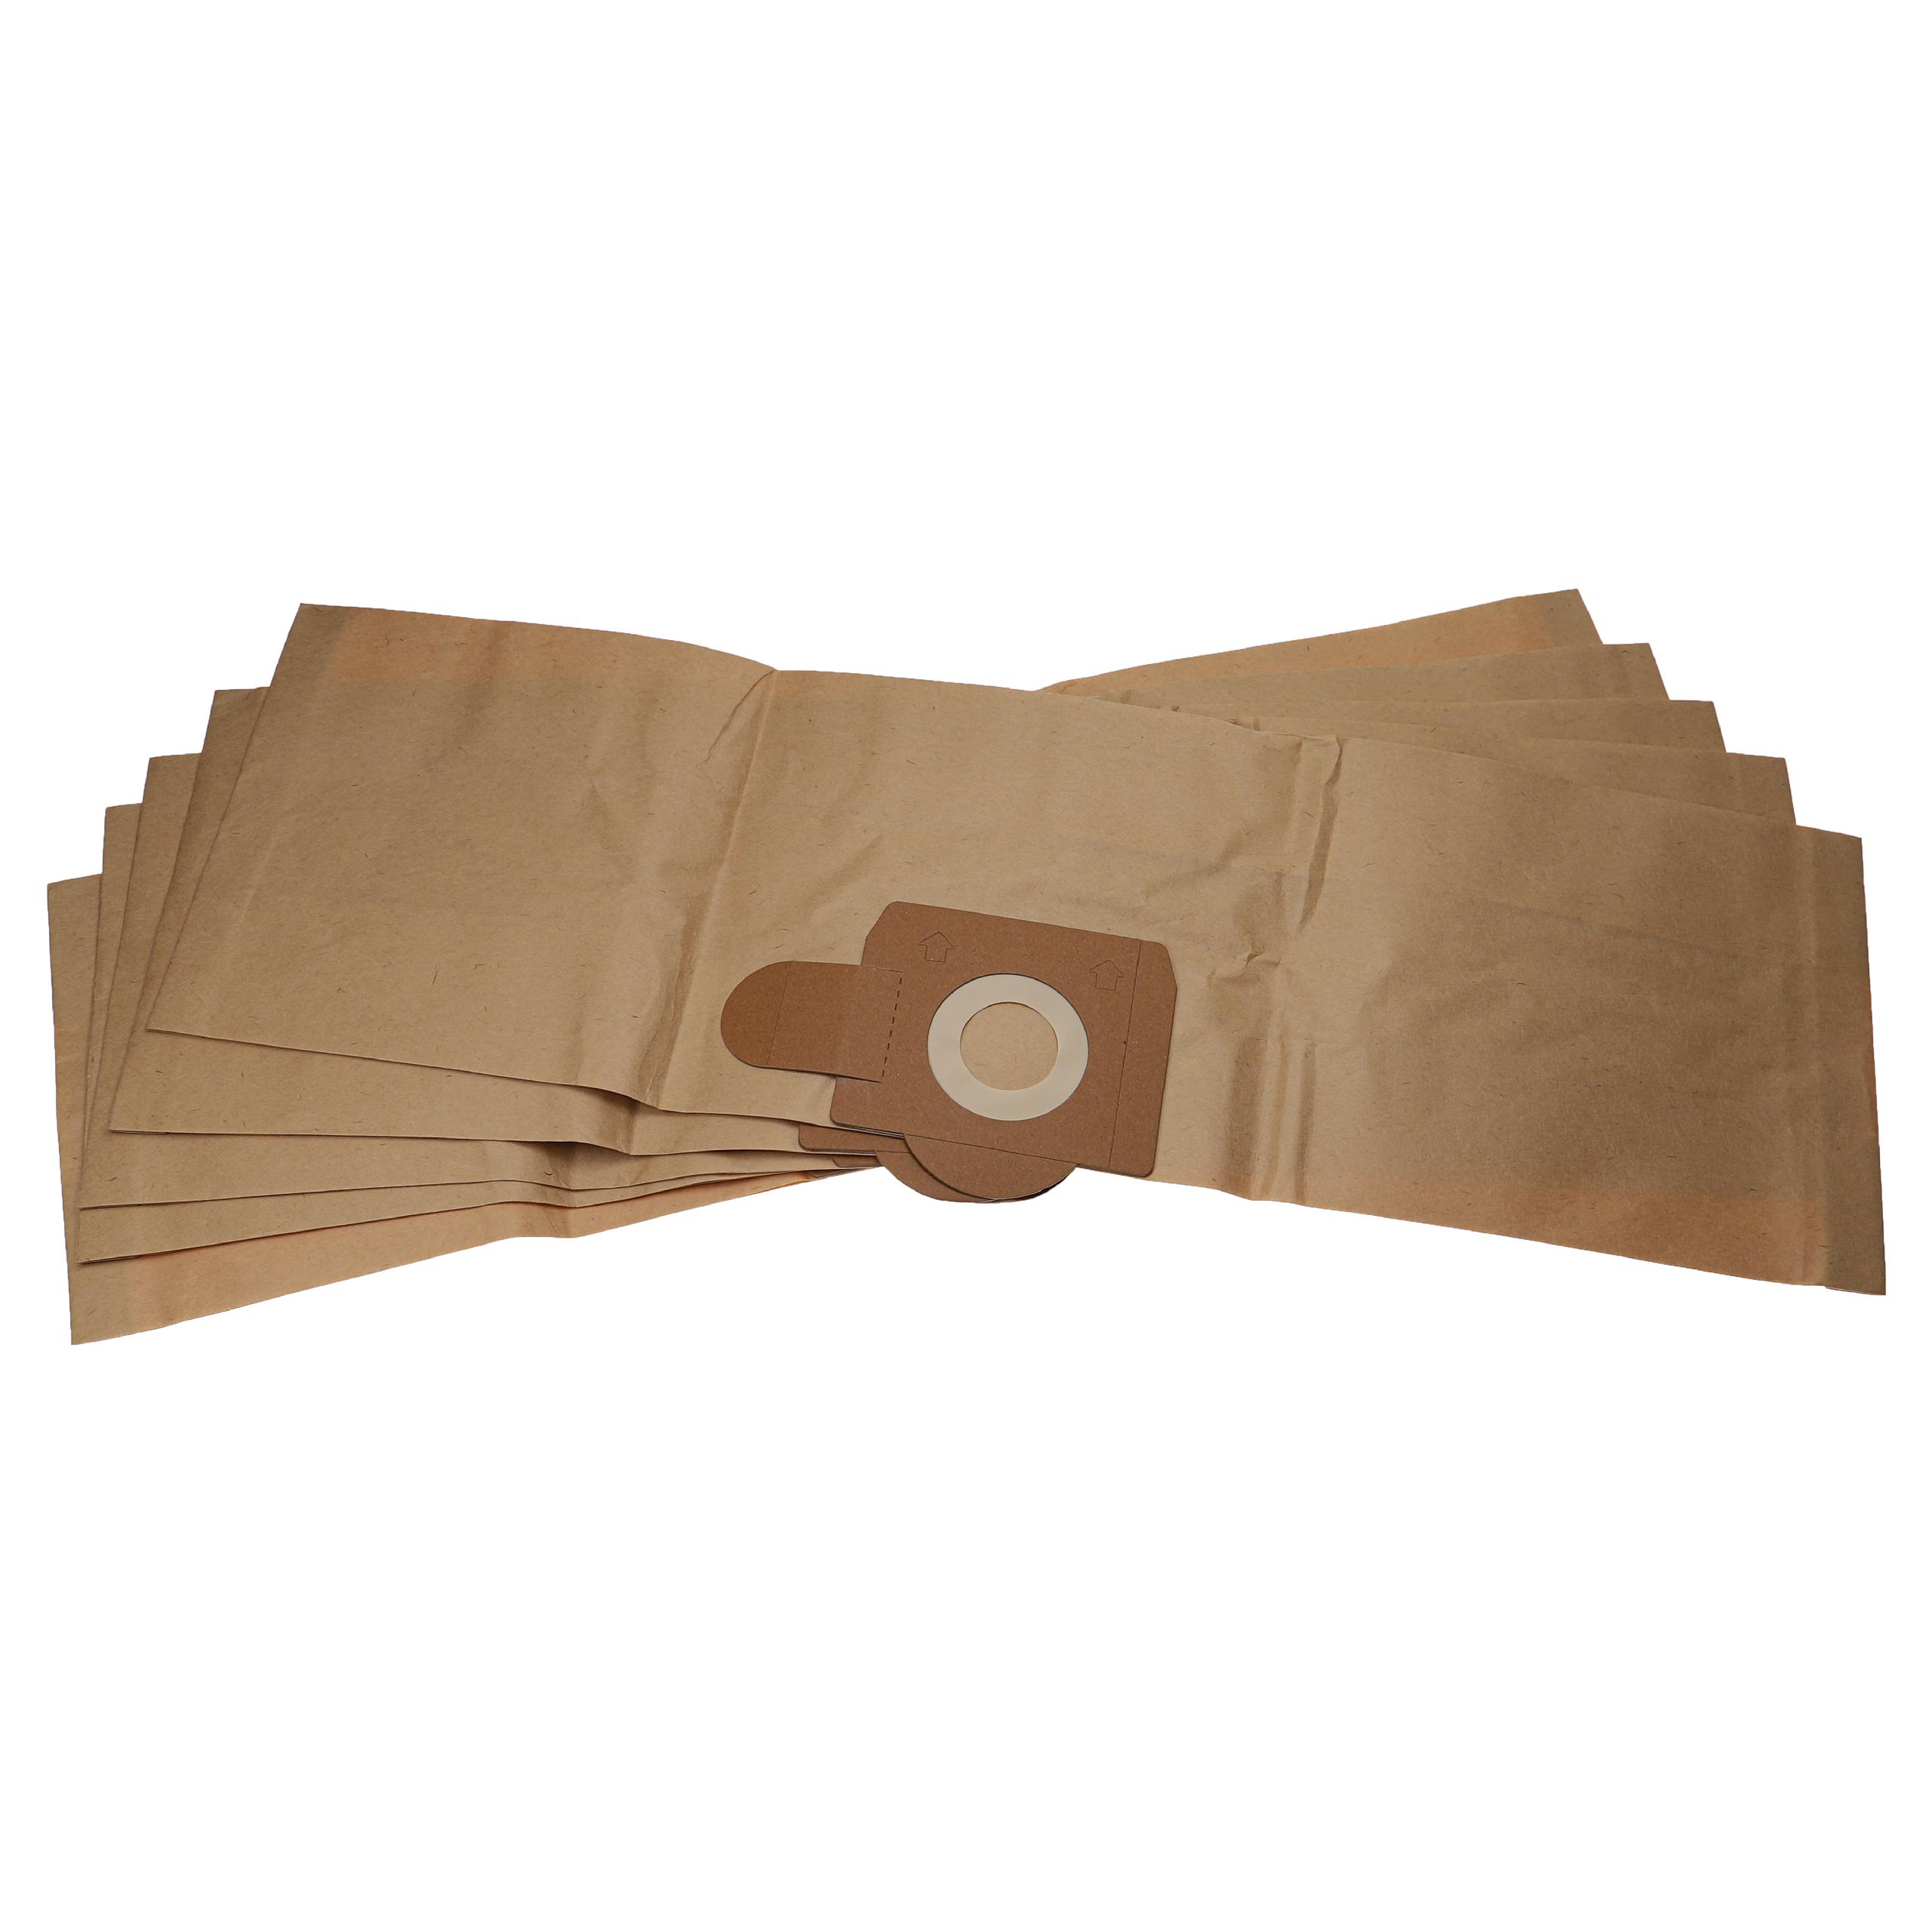 5x Vacuum Cleaner Bag replaces Bosch 3165140210454, 2605411150 for Bosch - paper